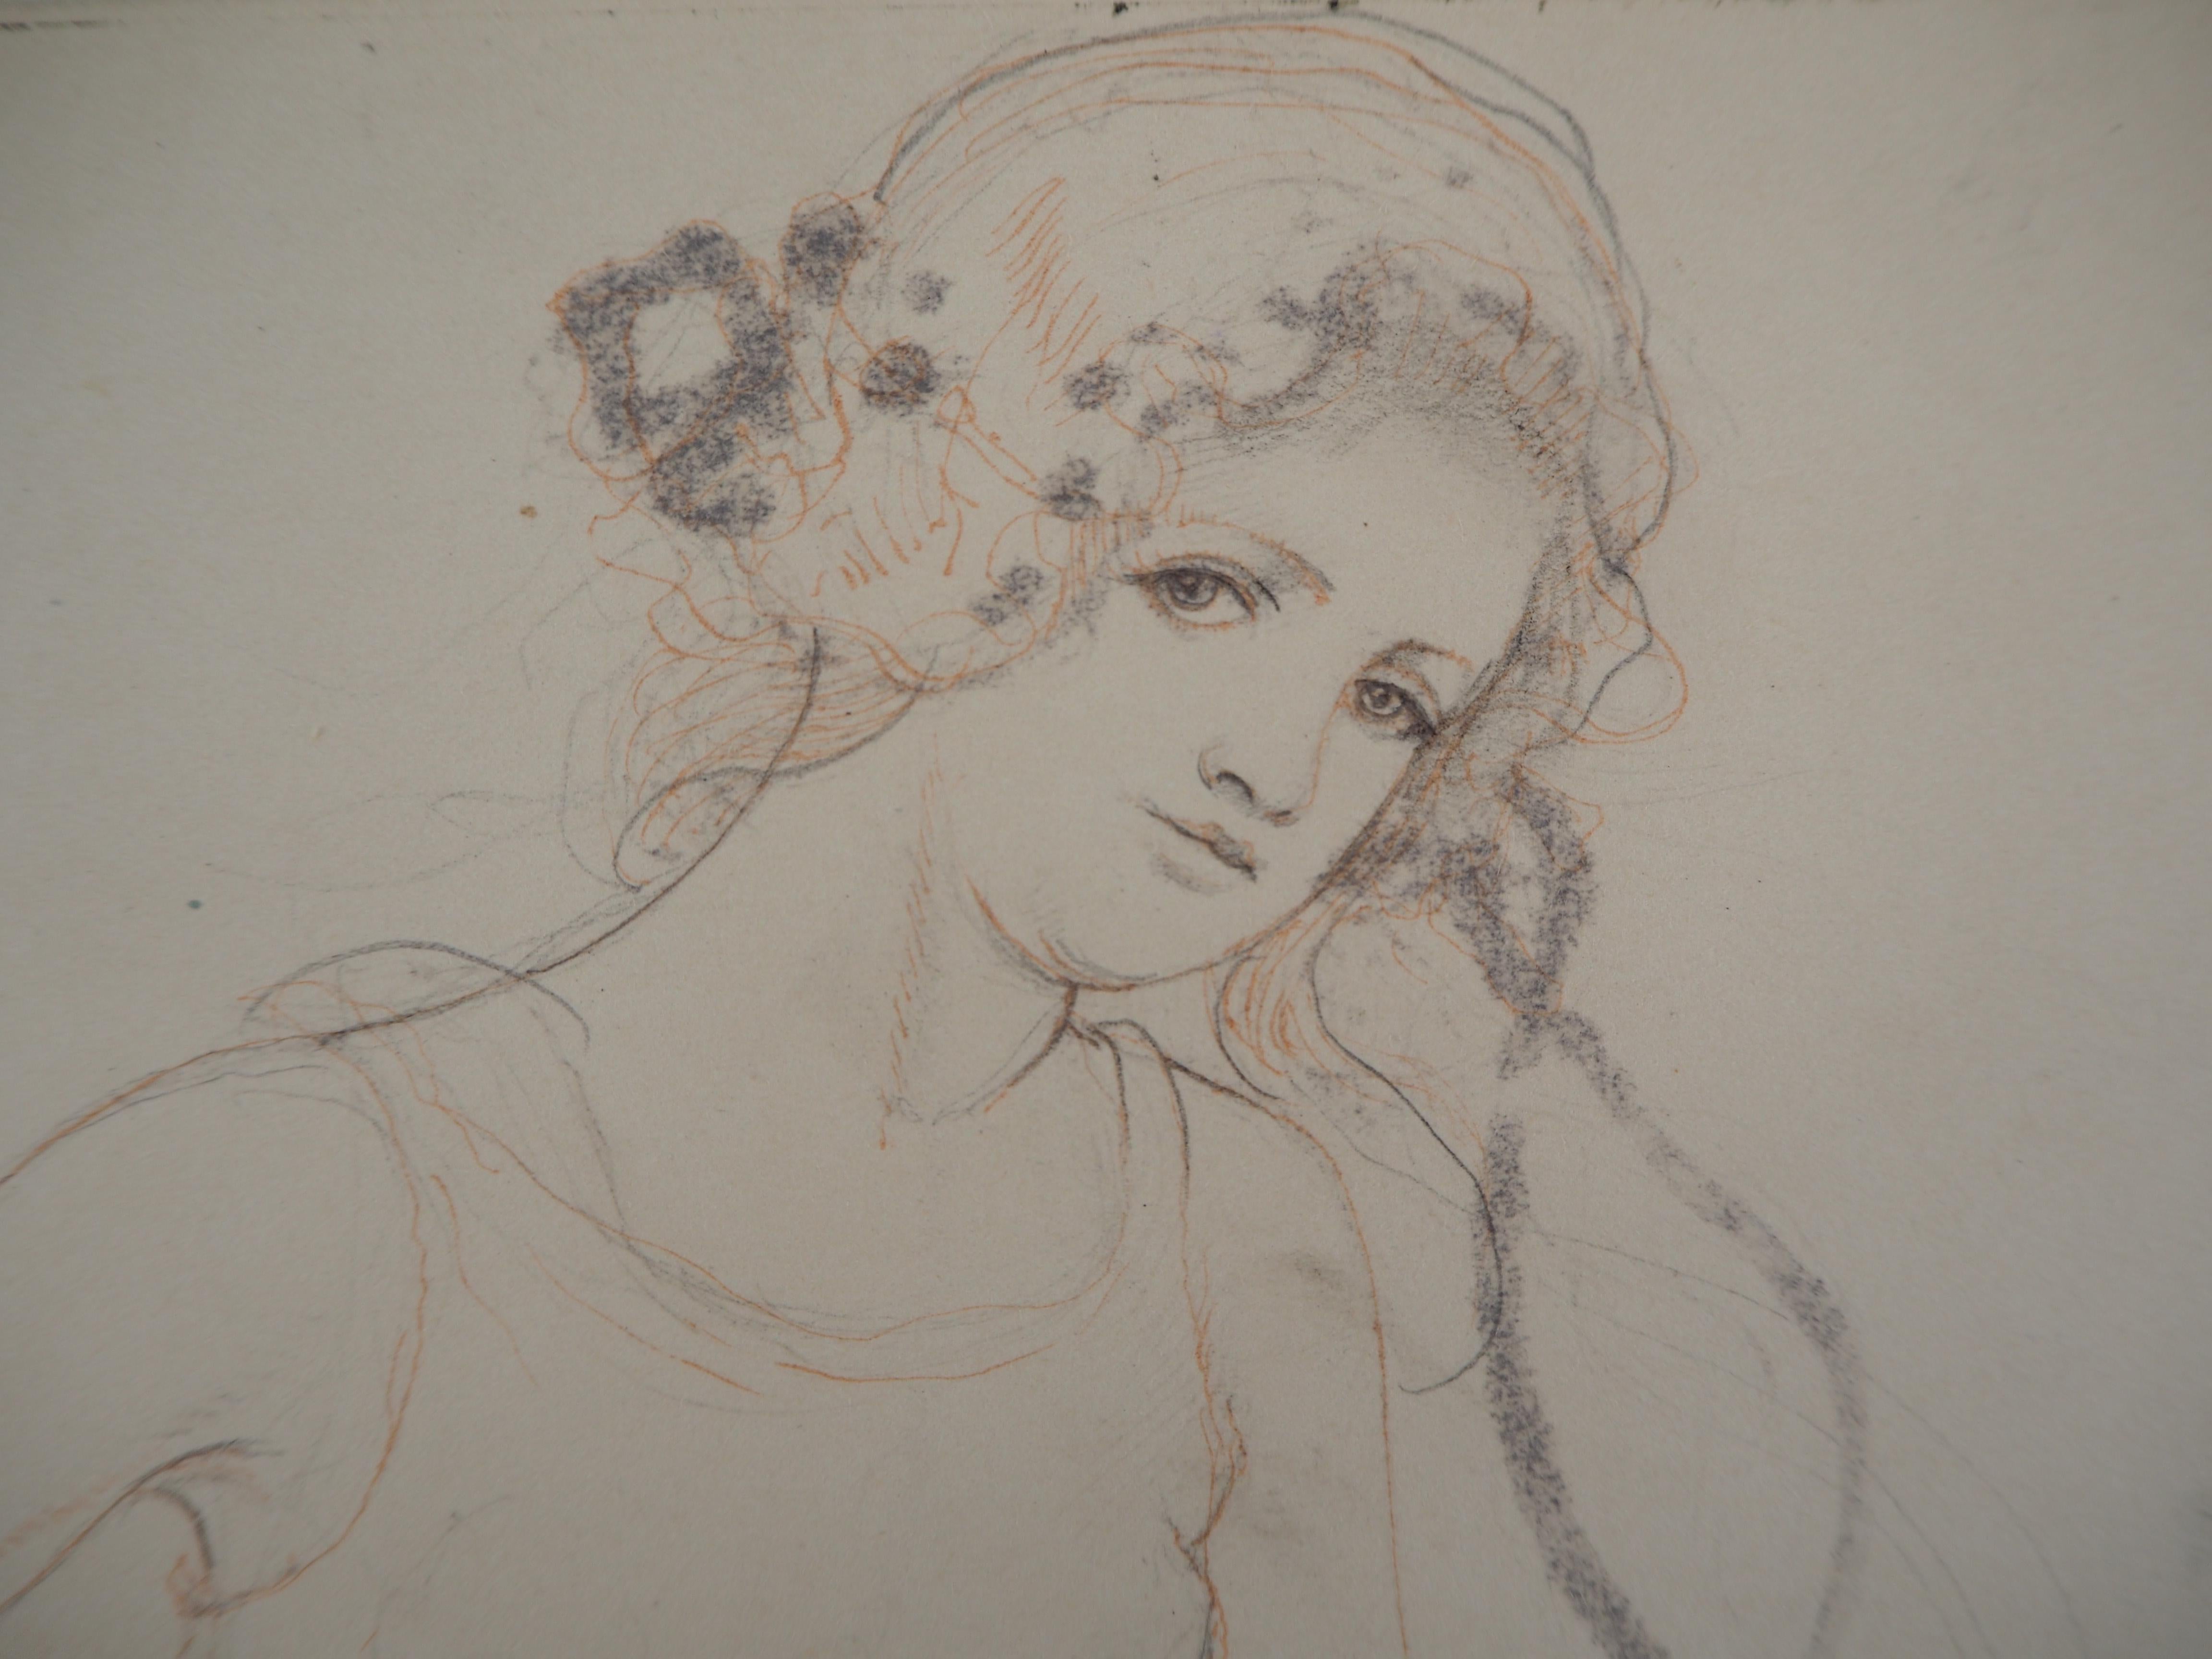 Armand Rassenfosse (1862-1934)
Young Girl with Flowers, 1928

Original pencil drawing with color pencil enhancement 
Signed in the lower left corner
Dated 1928
On paper 20.5 x 18.5 cm (c. 8 x 7 in) mounted on vellum 28 x 25 cm (c. 11 x 10